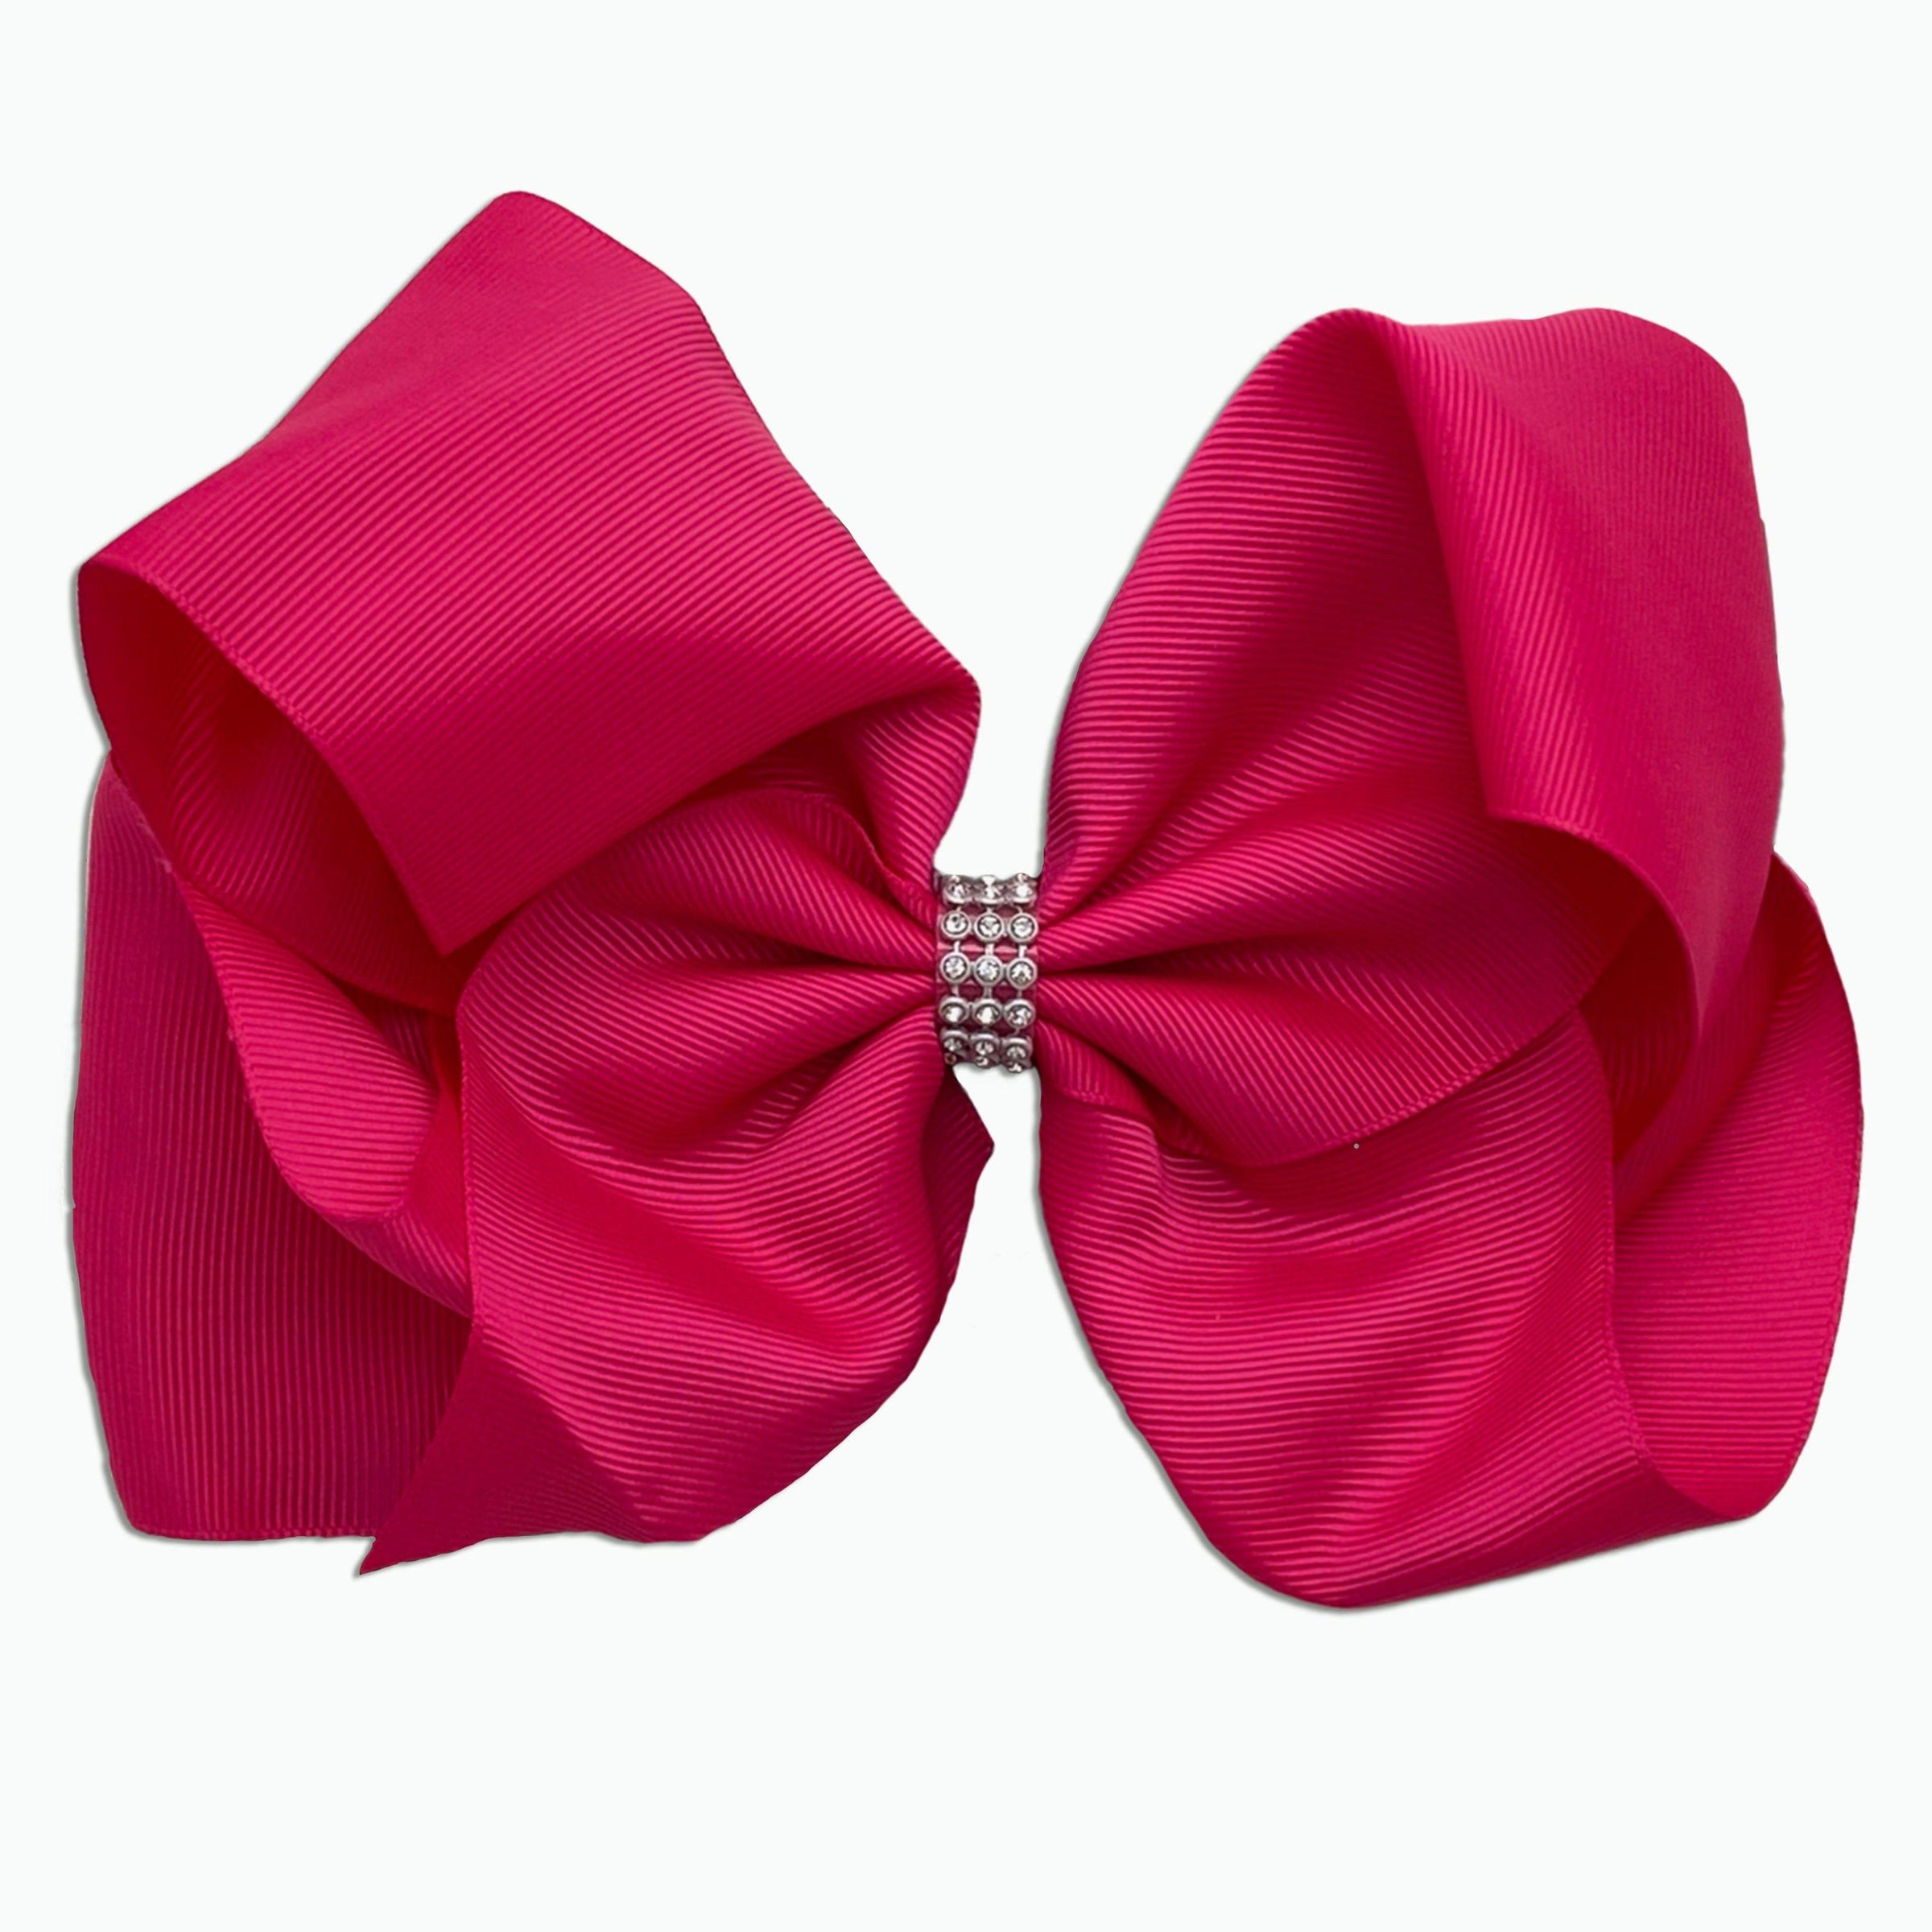 Pink Hair Bow, 8 Inch Bow Hair Gift For Girls, Rhinestone Bow, Big Pink  Bow, Large Jumbo Bow, Light Pink Hair Bow (Light Pink/Rhinestone)